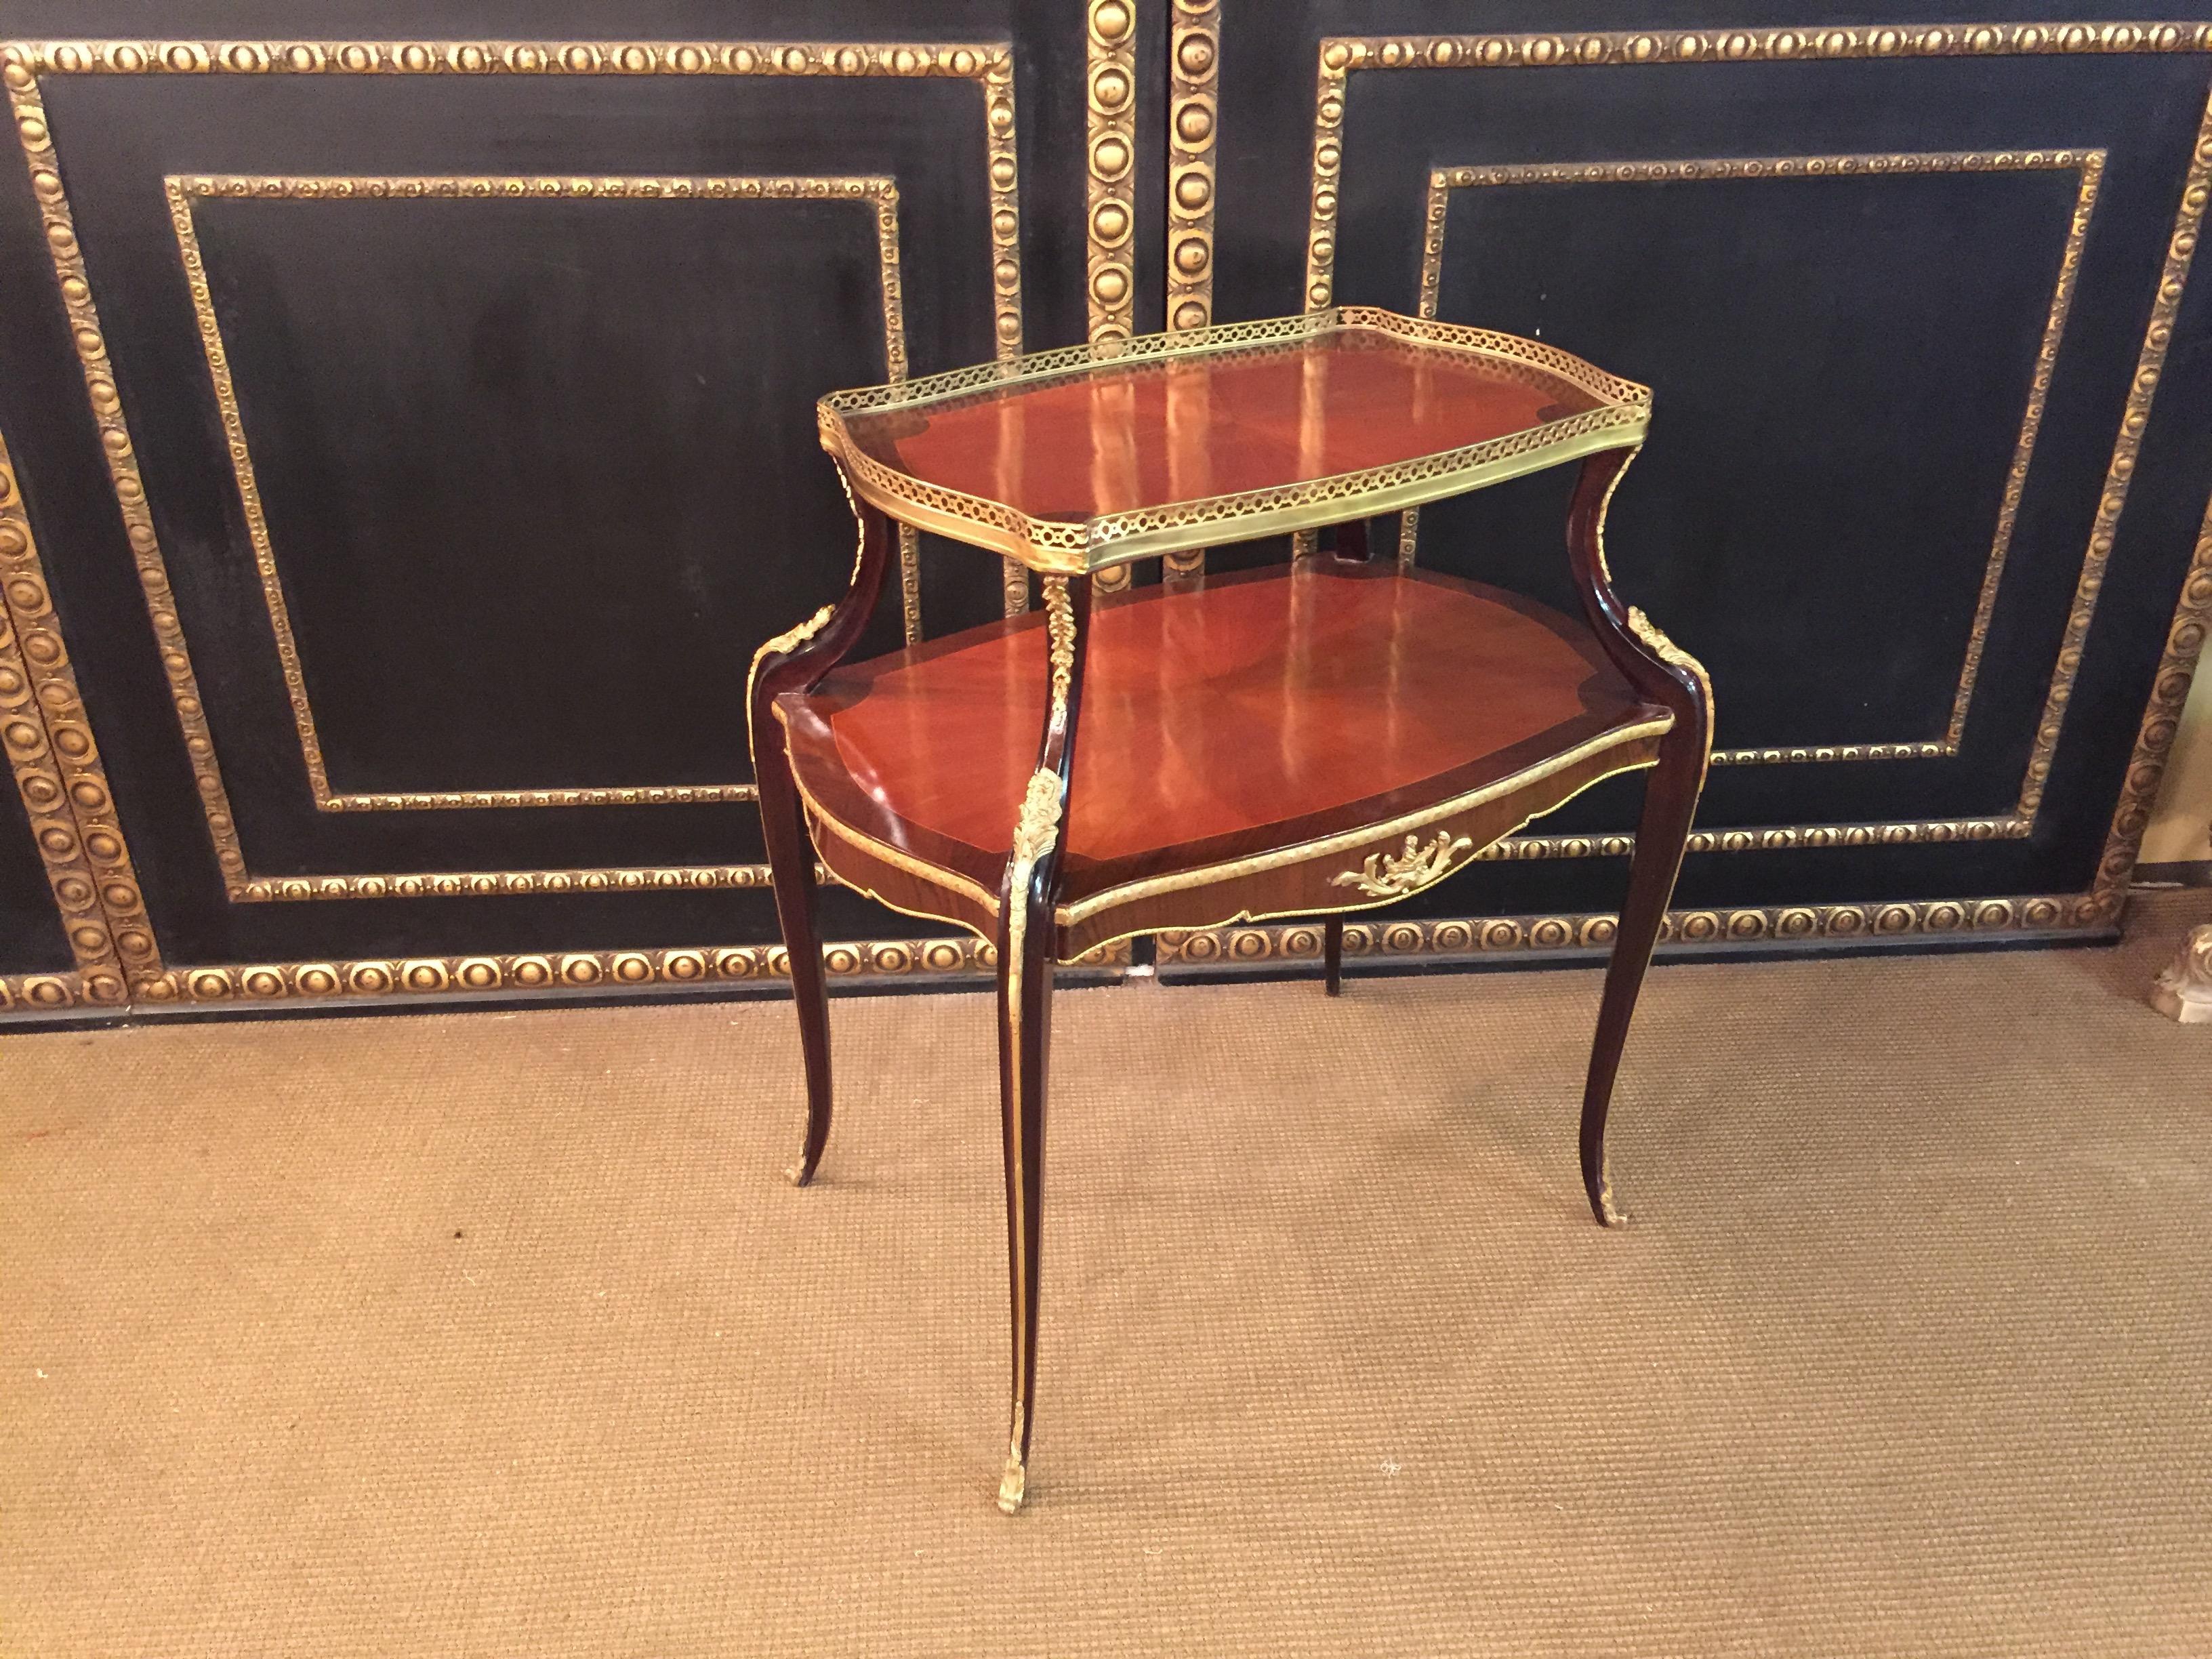 20th Century Unique French Side Table or Étagère antique after F. Linke mahogany veneer For Sale